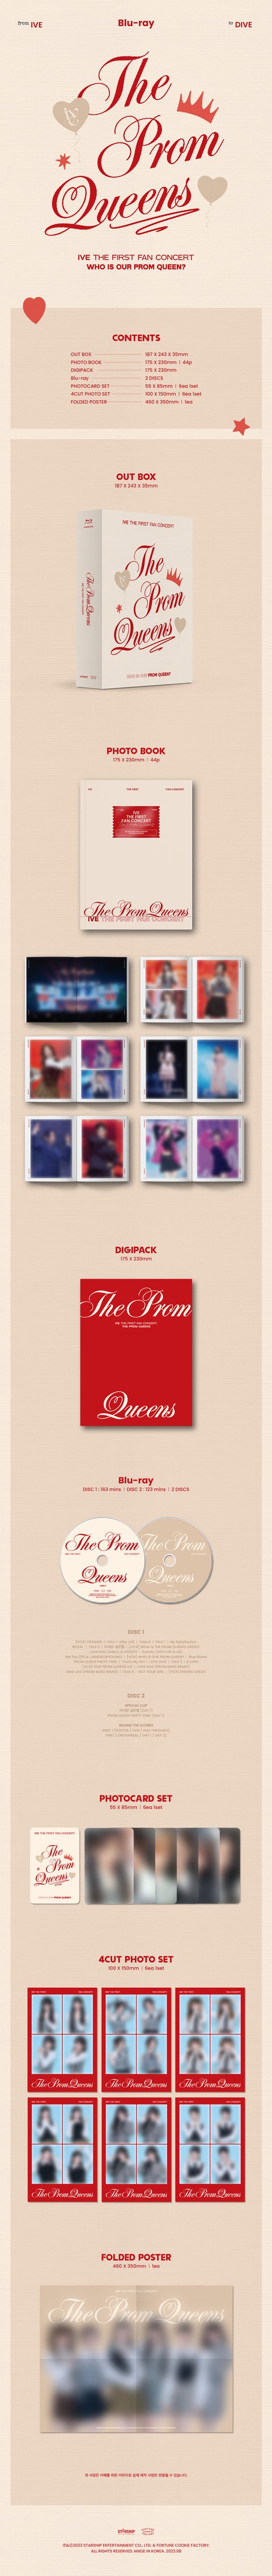 IVE - THE FIRST FAN CONCERT [The Prom Queens] (BLU-RAY VER.)